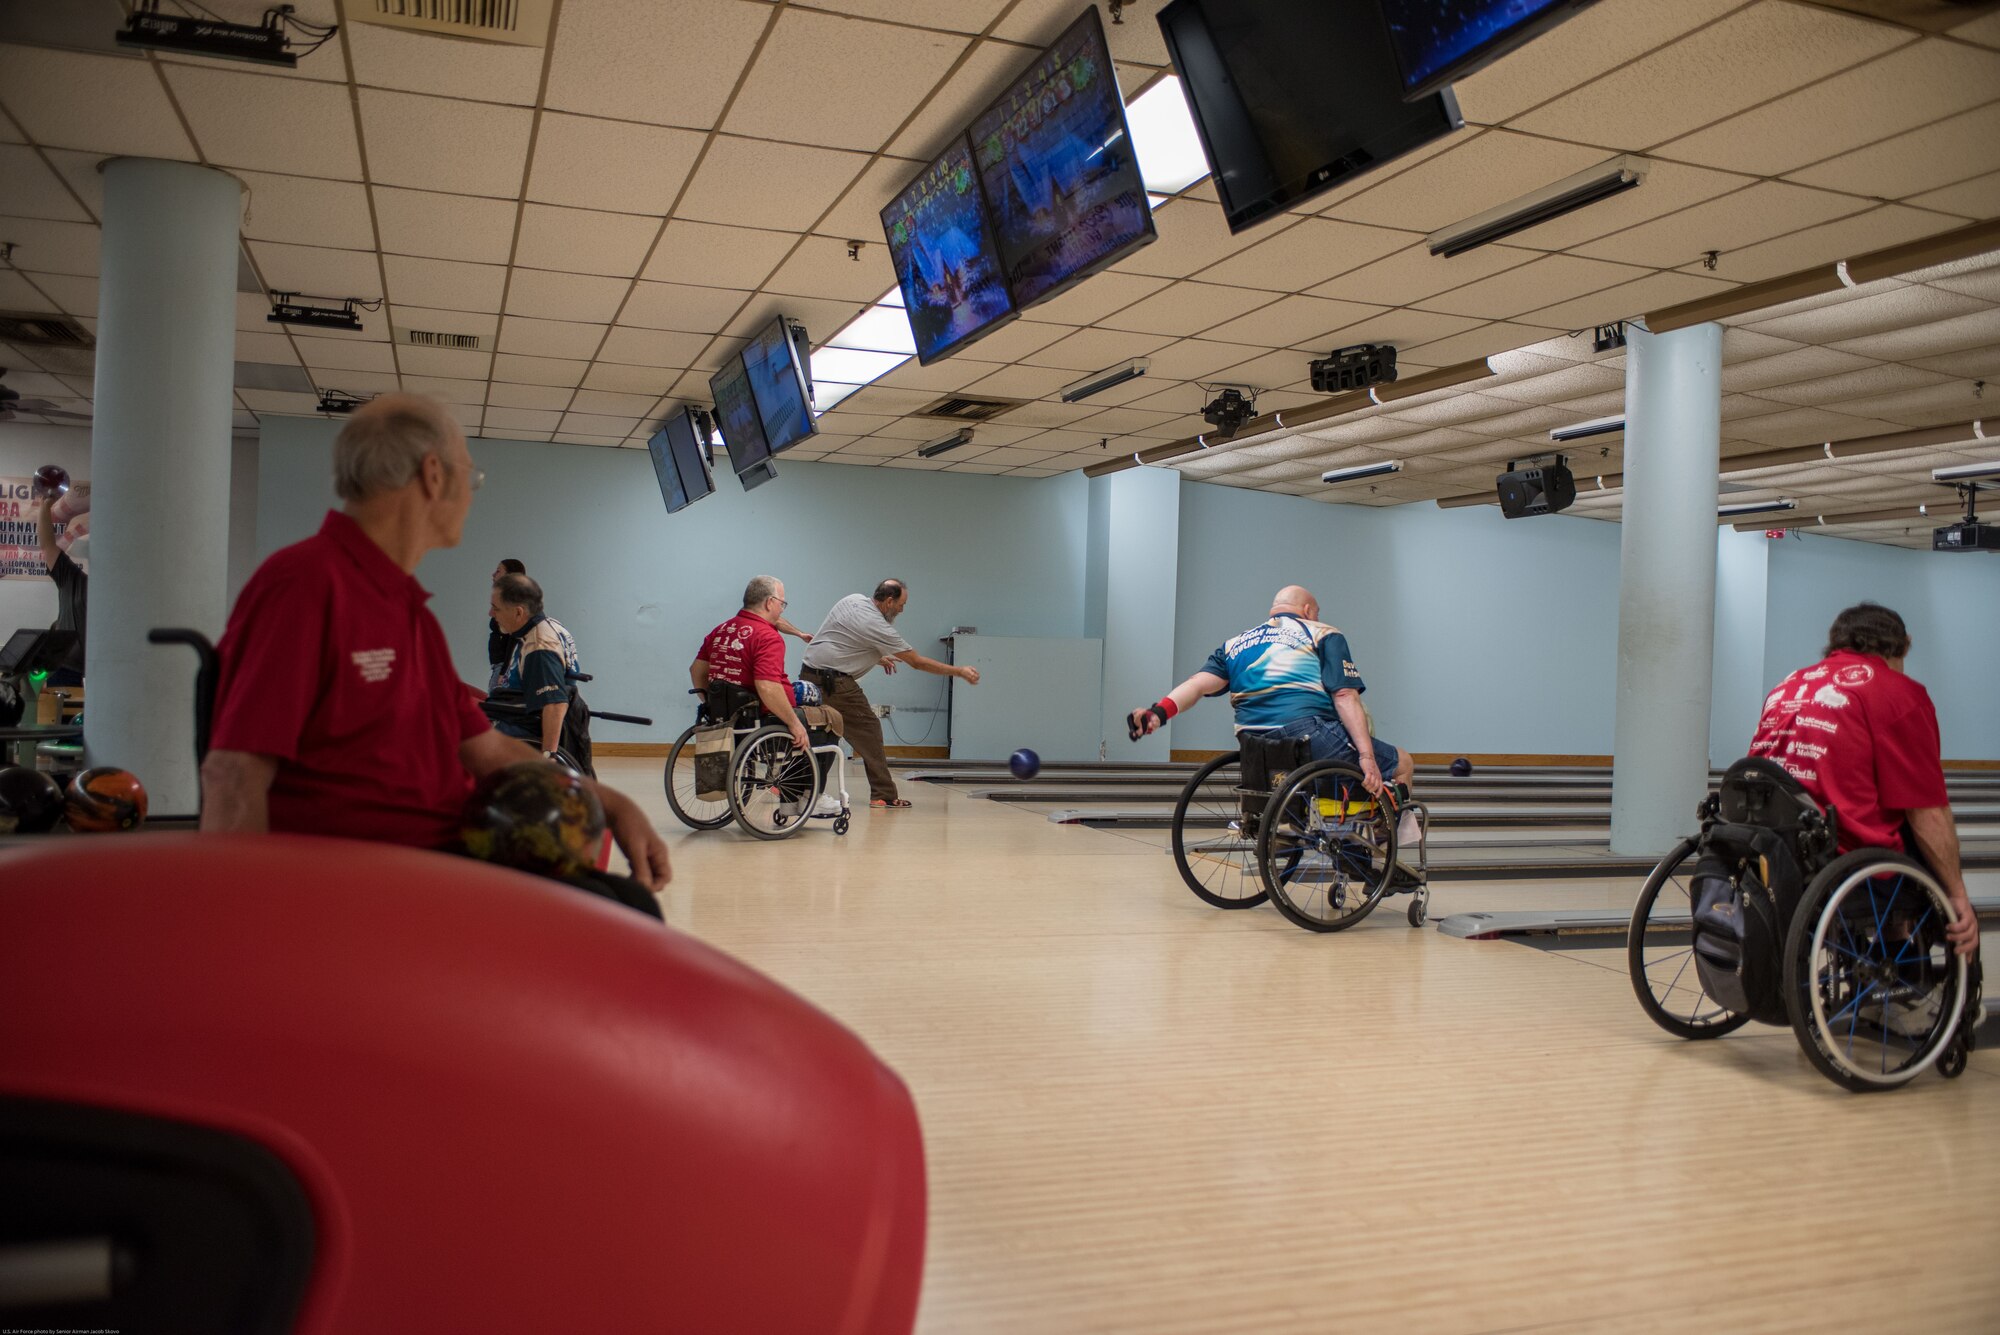 Wounded Warriors and disabled veterans bowl during an event hosted by the Office of the Warrior Advocate at Offutt Air Force Base, Nebraska, Dec. 21, 2017. The adaptive bowling event aimed to strengthen the community of injured active duty service members and veterans the office has been building since it was established in October 2016. (U.S. Air Force photo by Senior Airman Jacob Skovo)